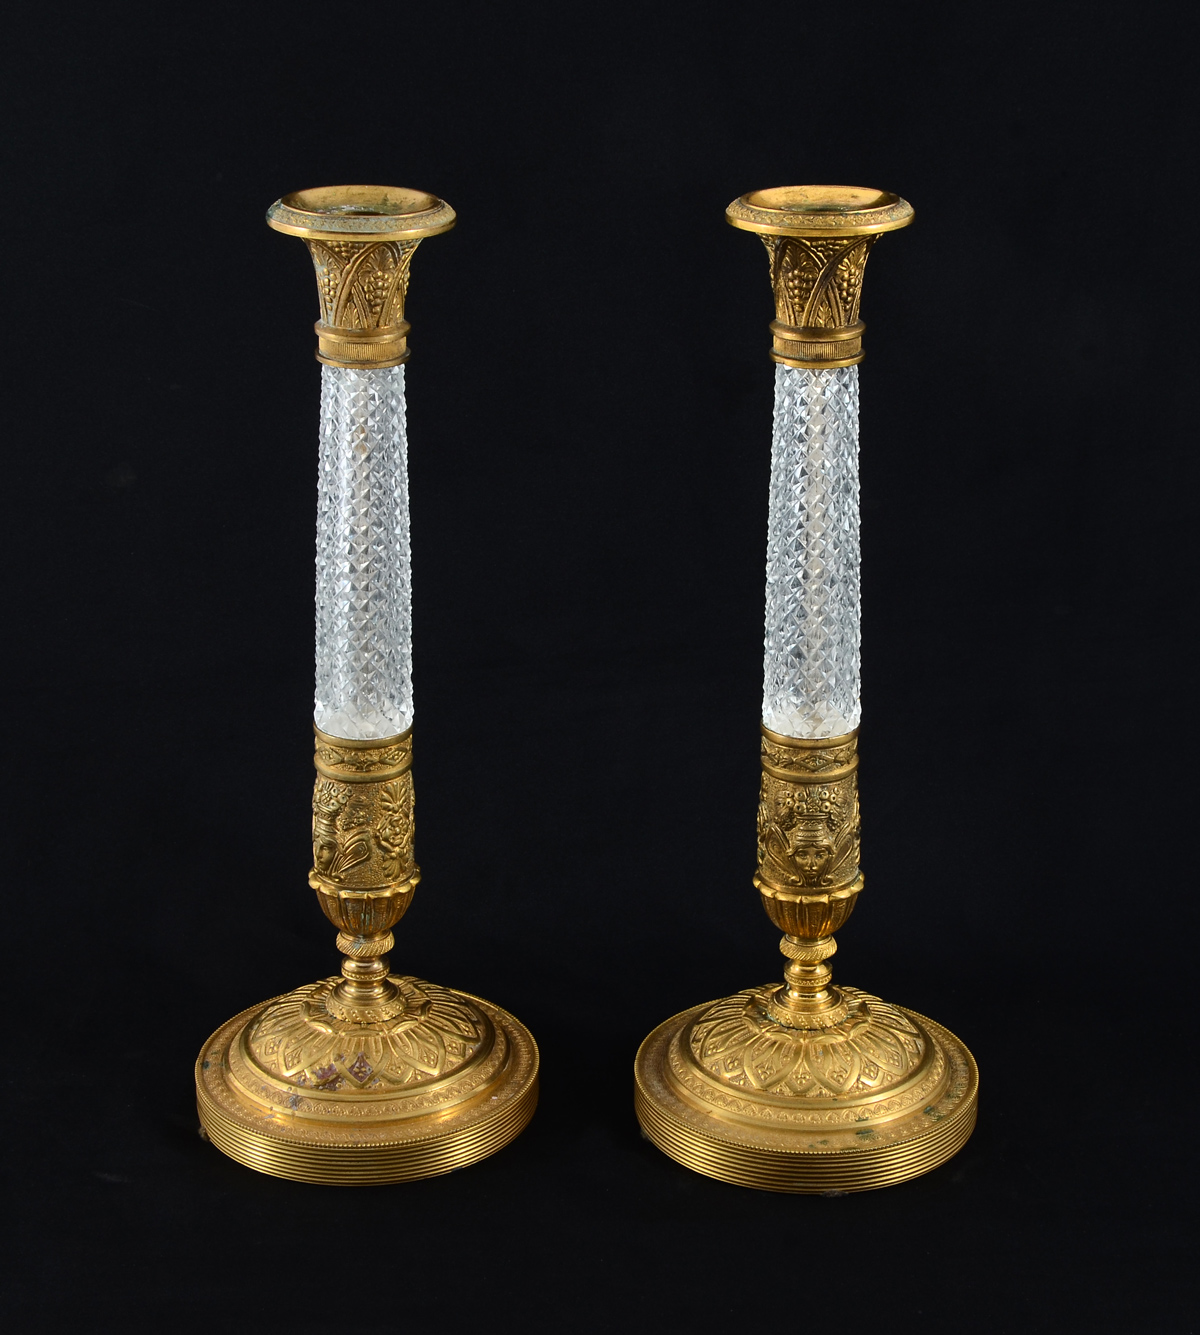 PAIR OF FRENCH DORE BRONZE & CRYSTAL